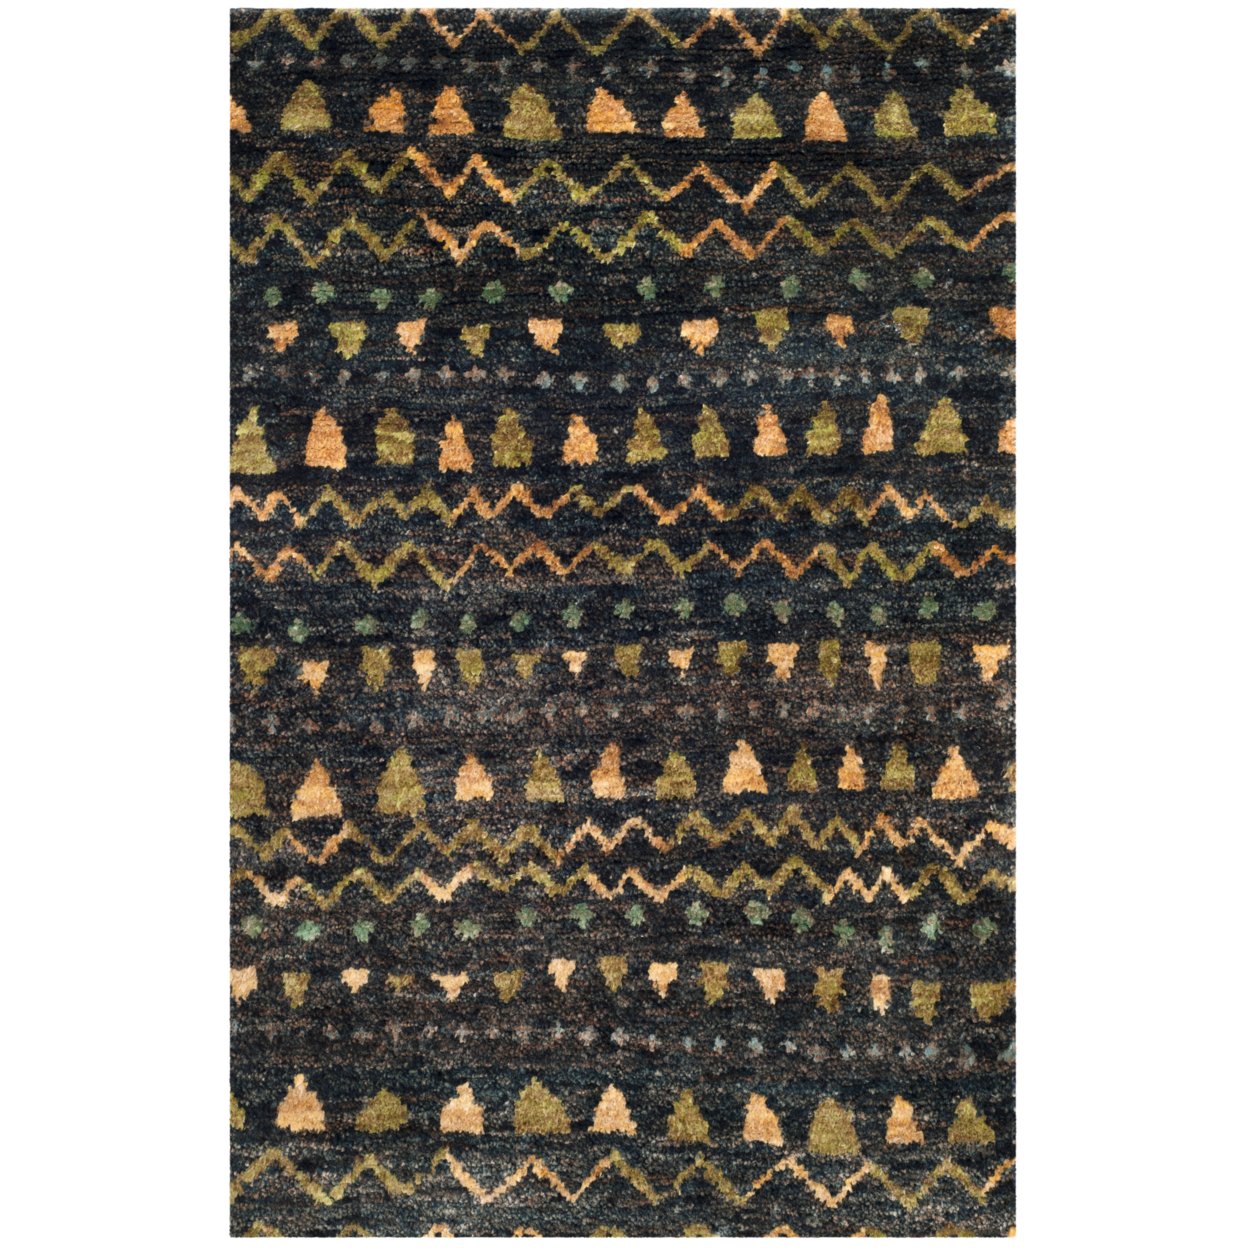 SAFAVIEH Bohemian BOH653A Hand-knotted Black / Gold Rug - 4' X 6'